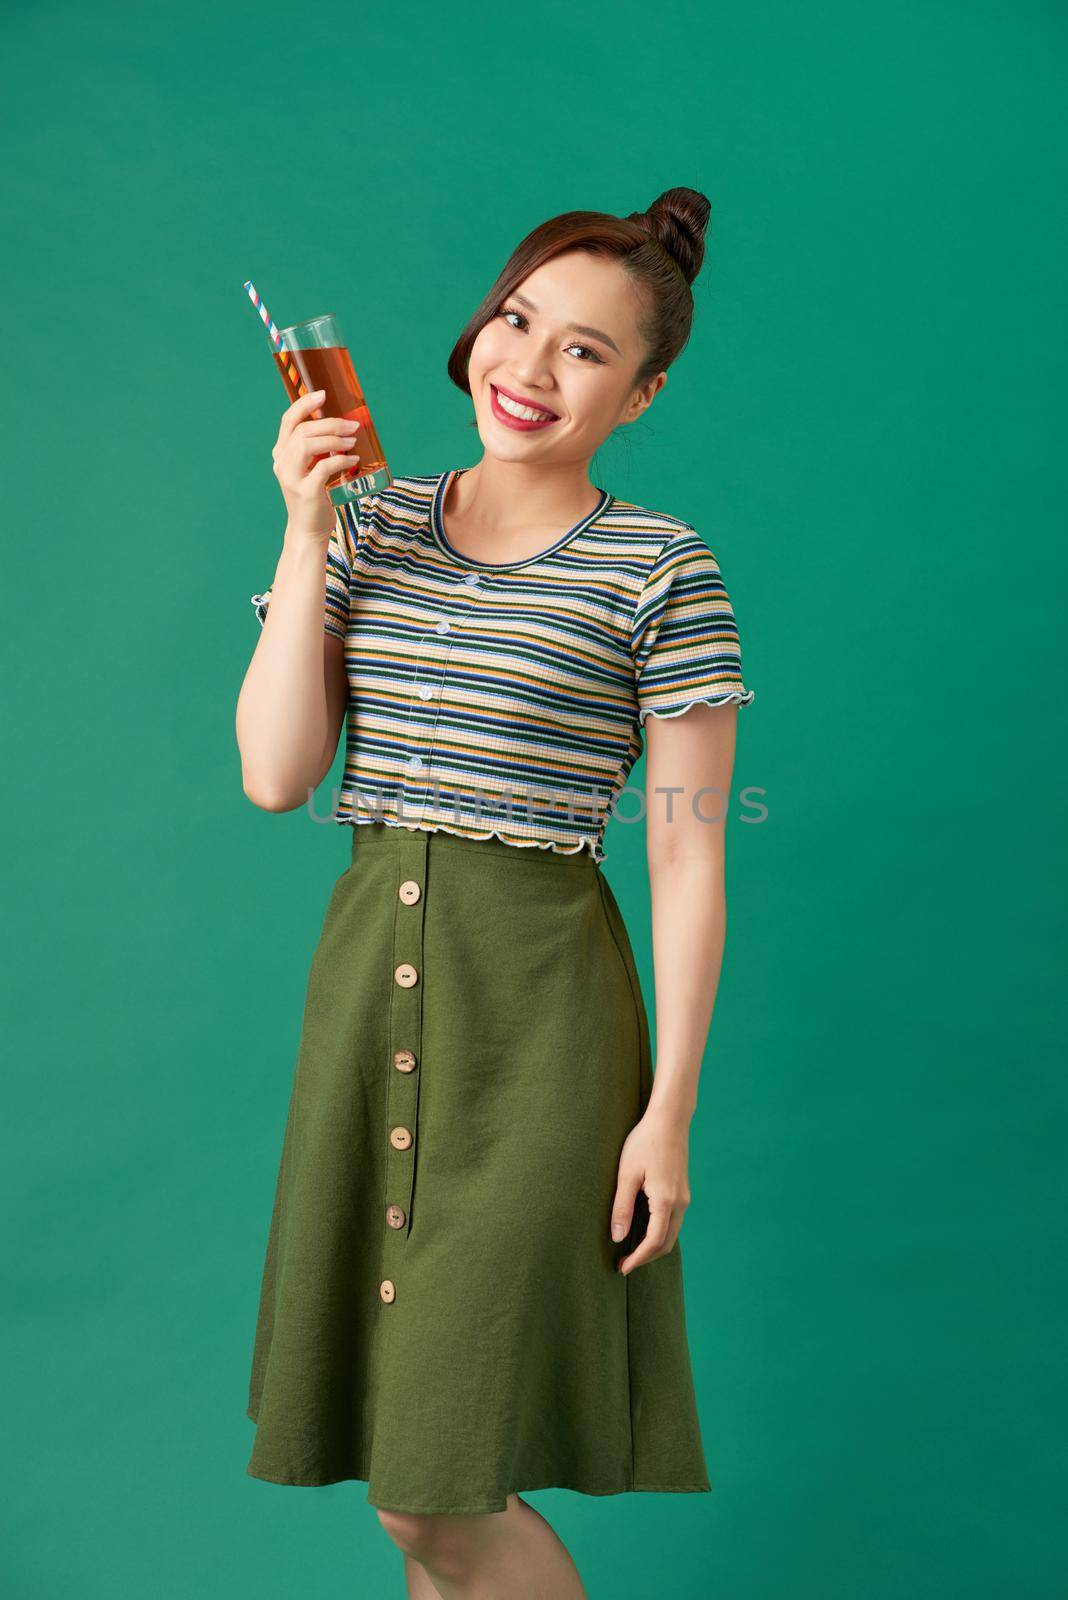 Laughing asian young woman holding soft drink and looking away.